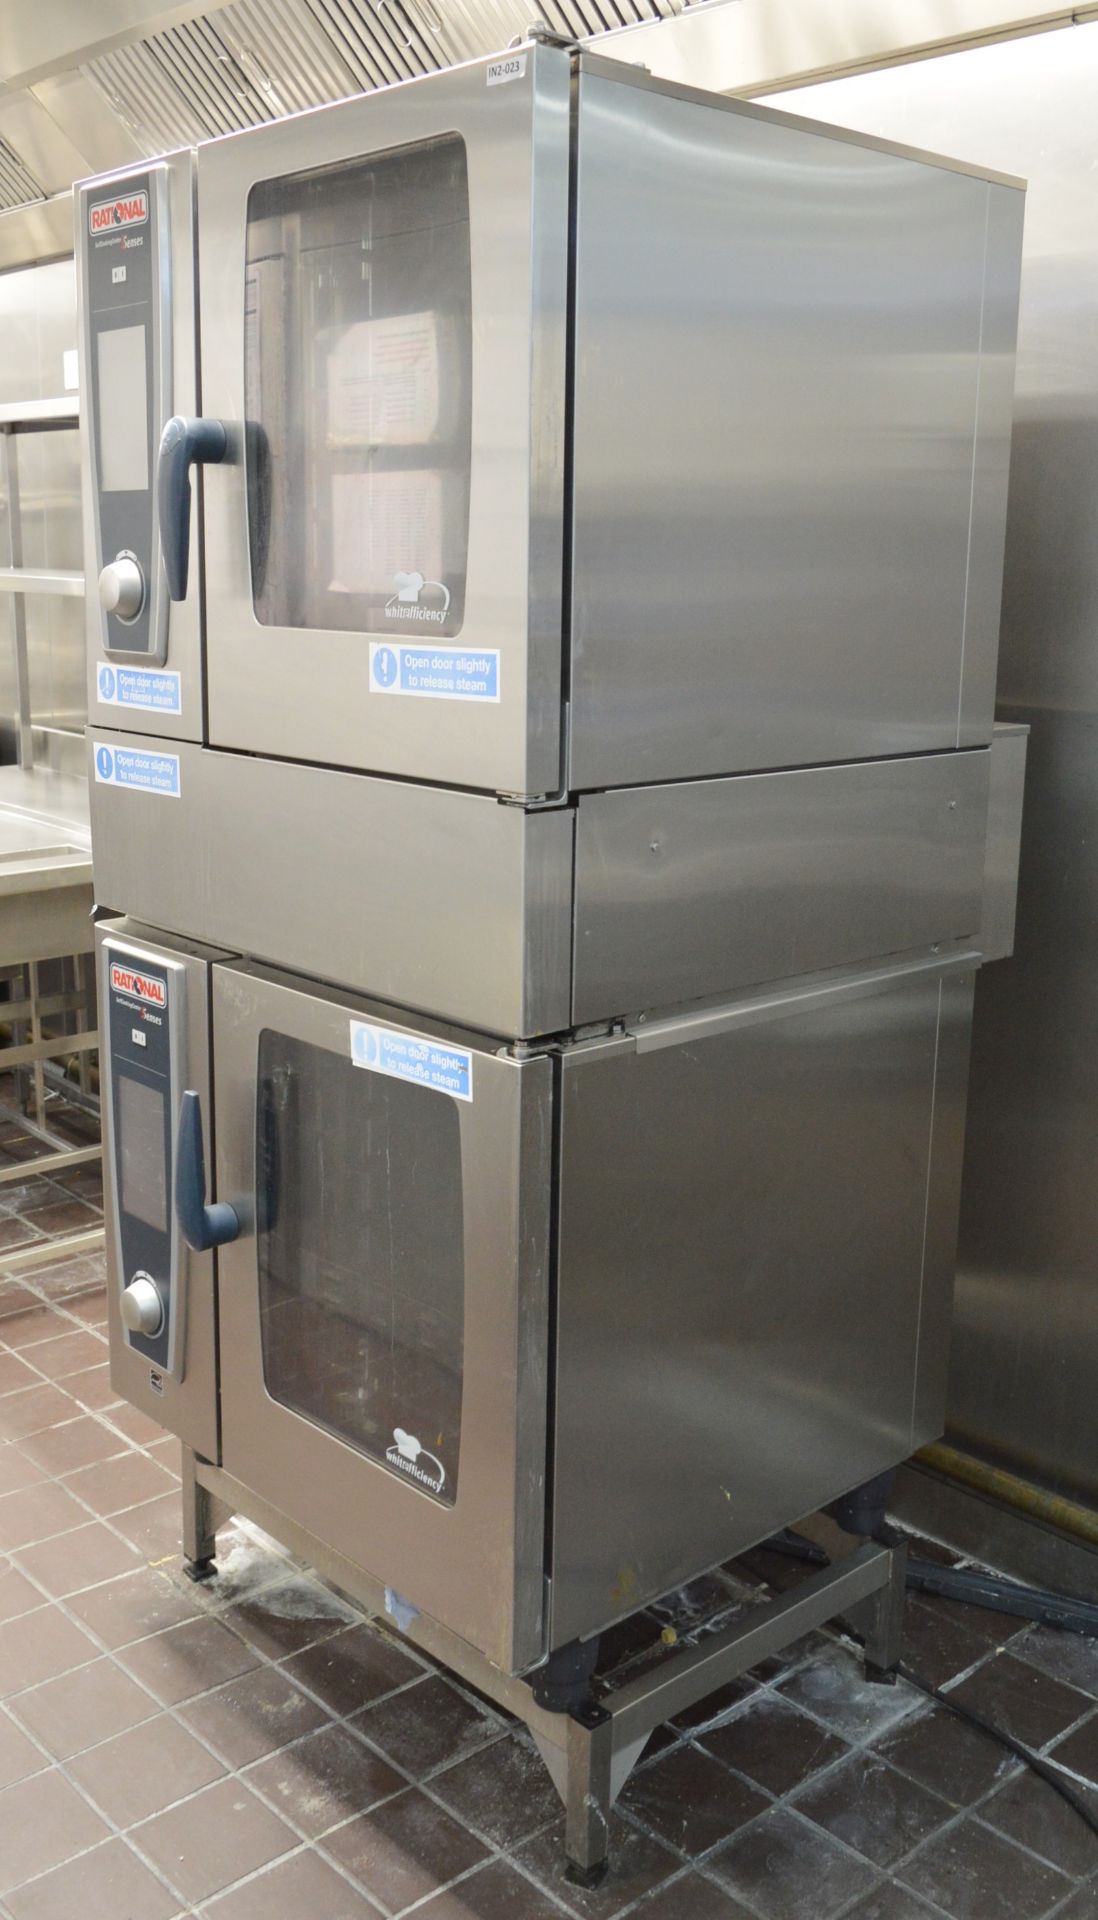 2 x Rational SCC WE 61G Gas Combination Ovens - Perfect For Hotels, Restaurants, Delis, Hospitals - Image 3 of 15